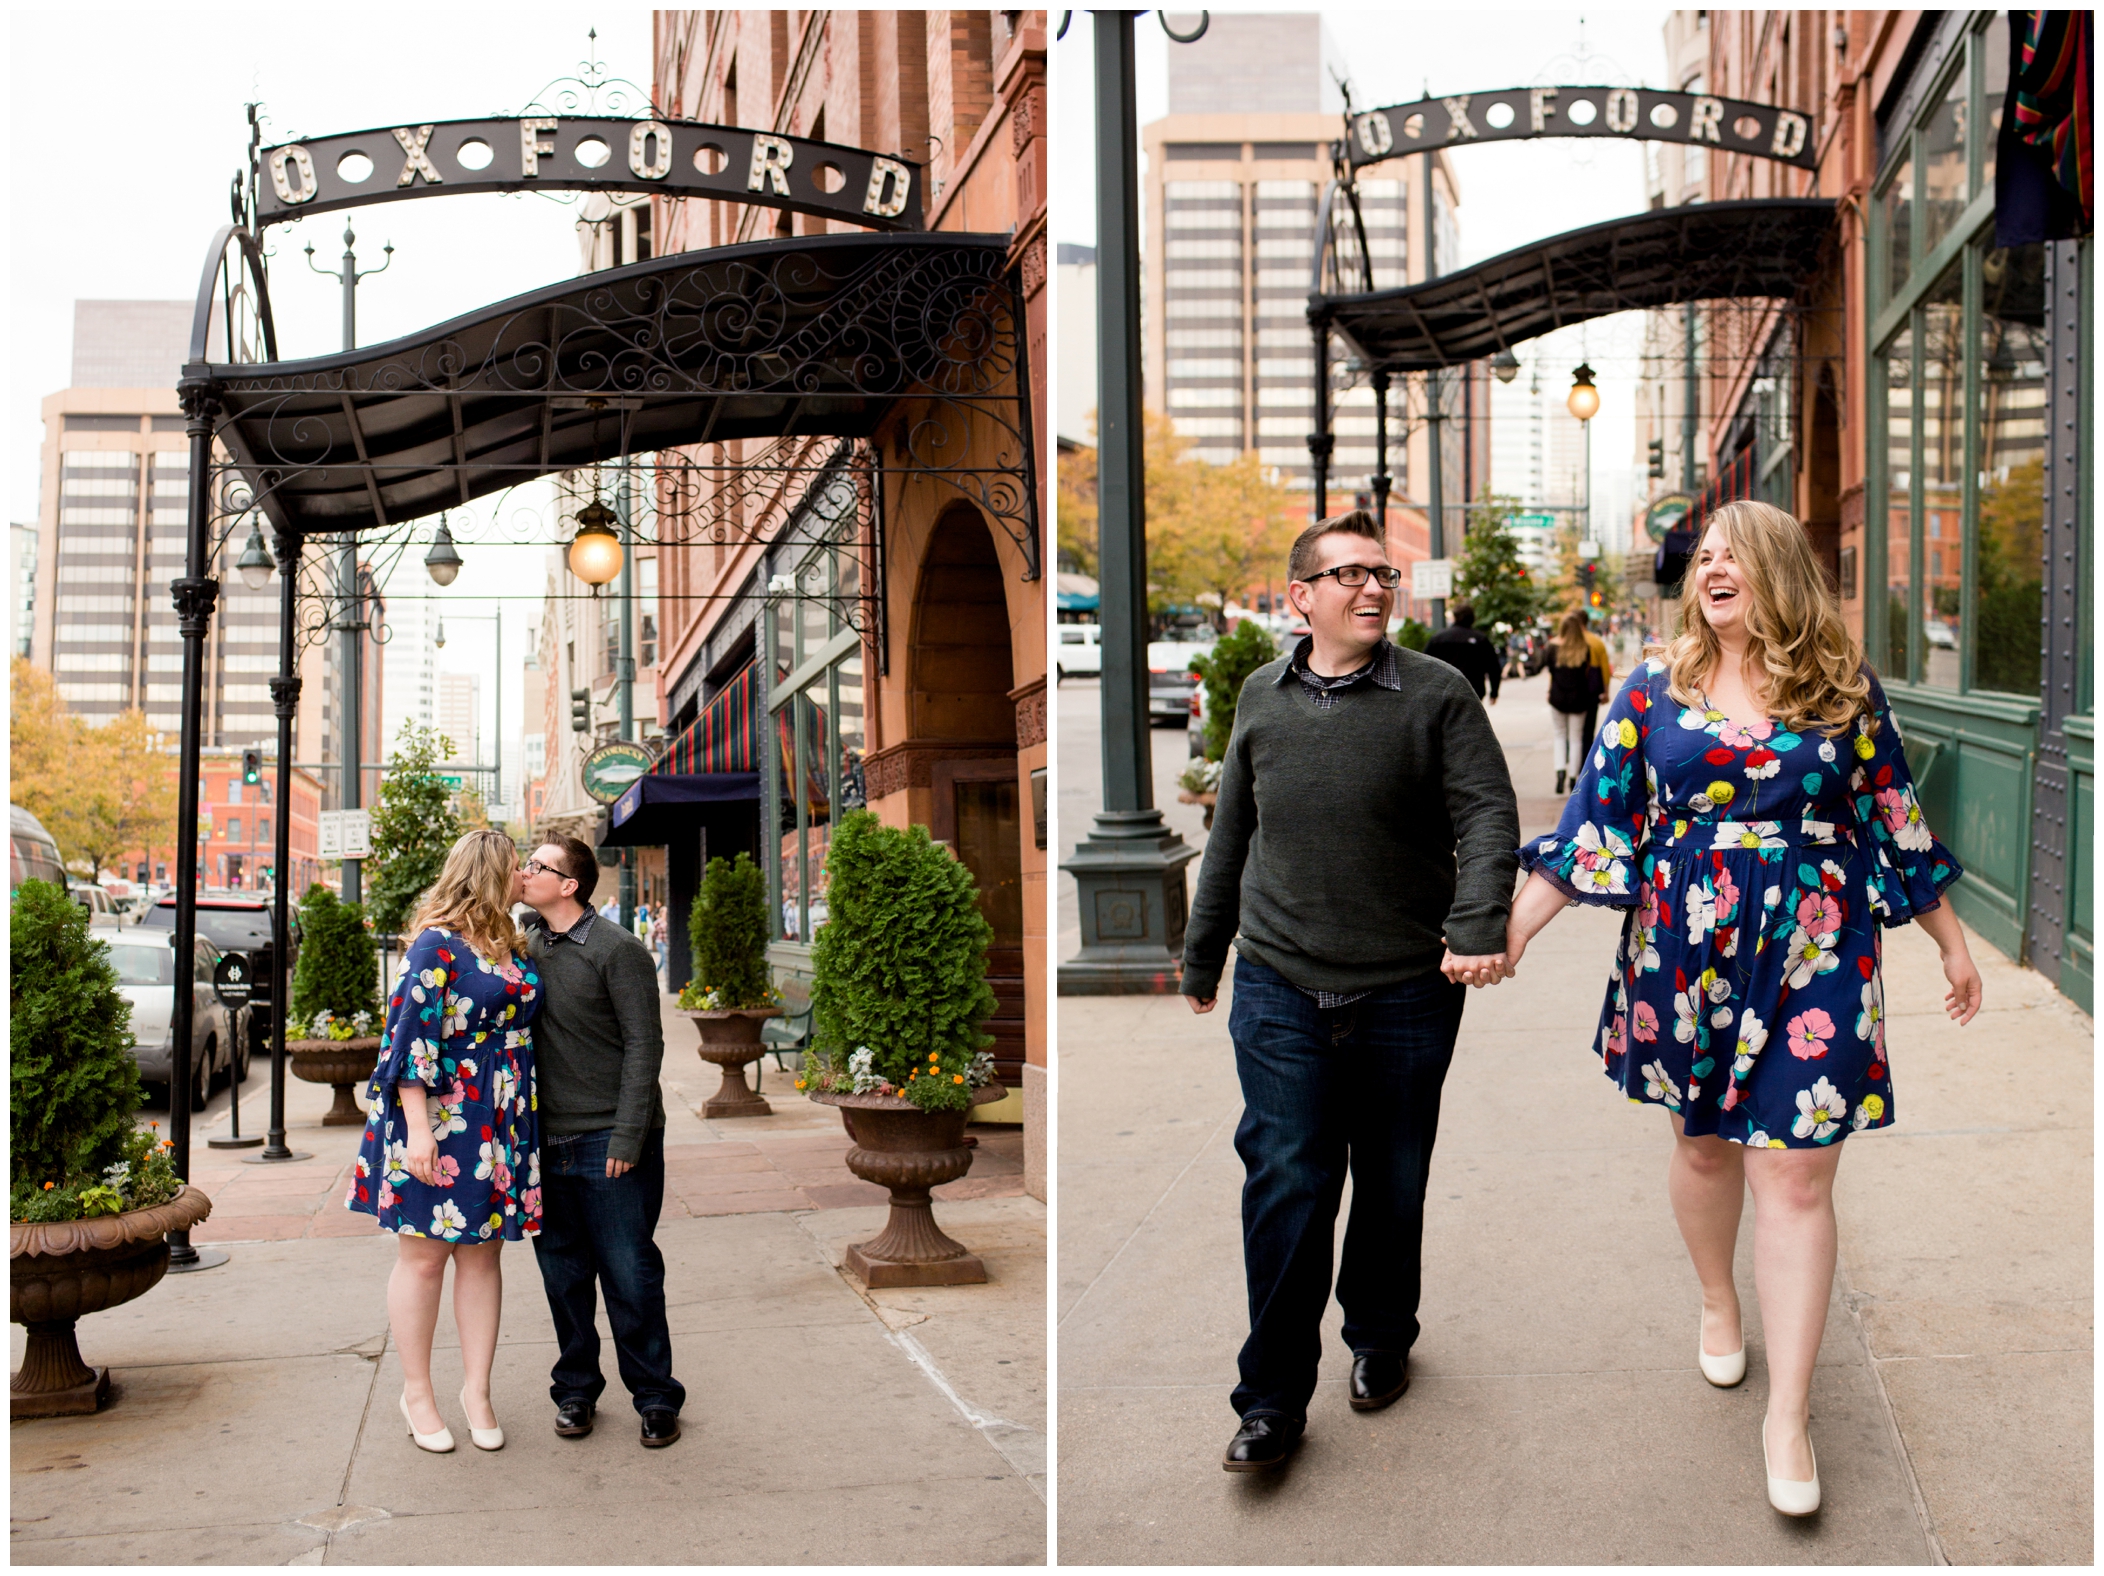 Denver engagement photos at the Oxford Hotel